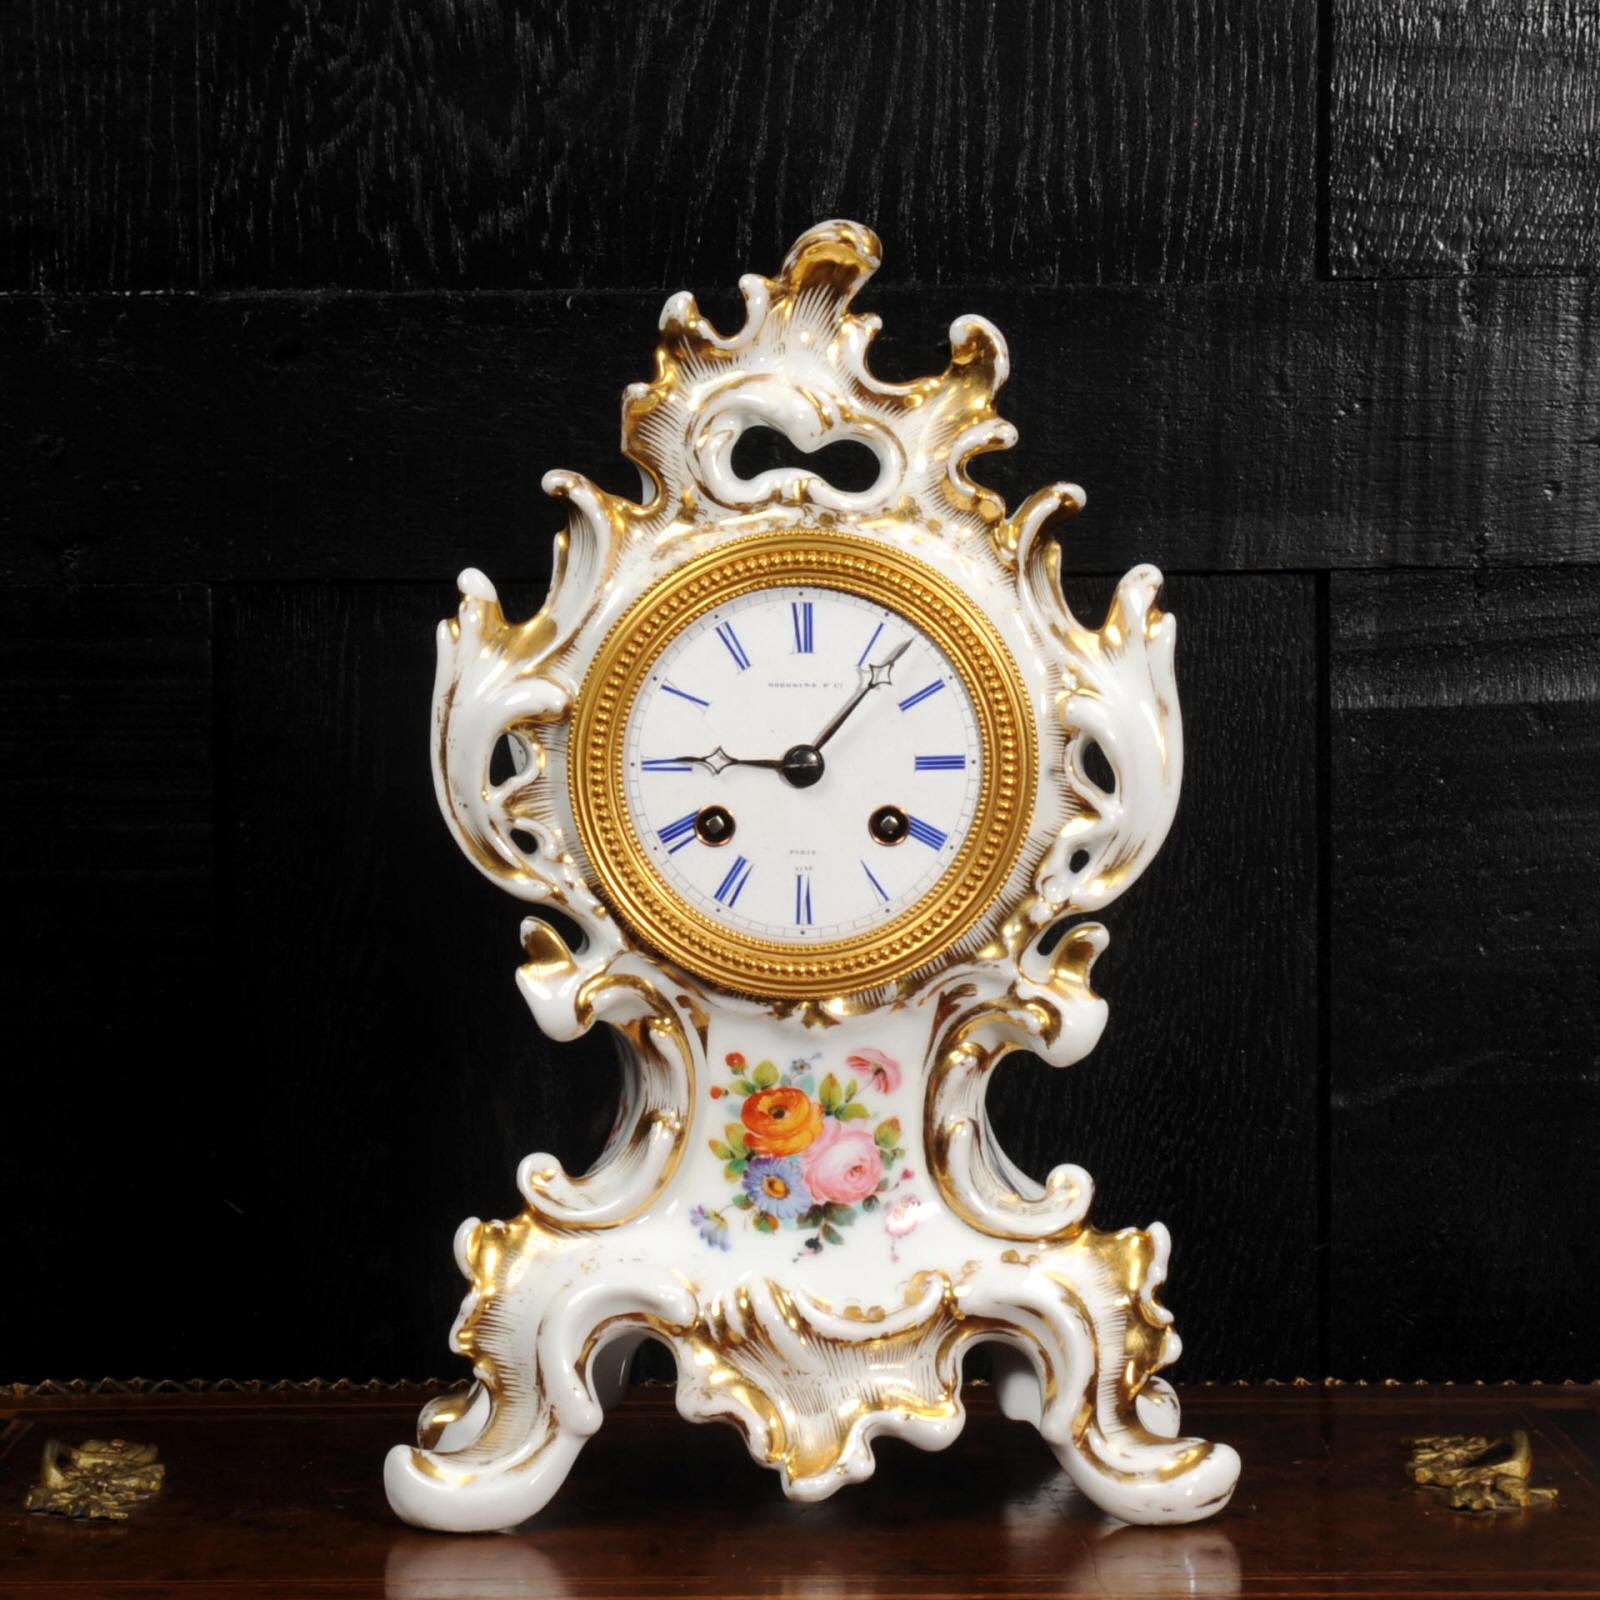 A lovely early French porcelain clock by Samuel Marti. Beautifully styled in the Rococo style with C scrolls and flowing foliage. Delicately decorated with exquisite bouquets of flowers and heightened with gilt.

The dial is porcelain enamel on